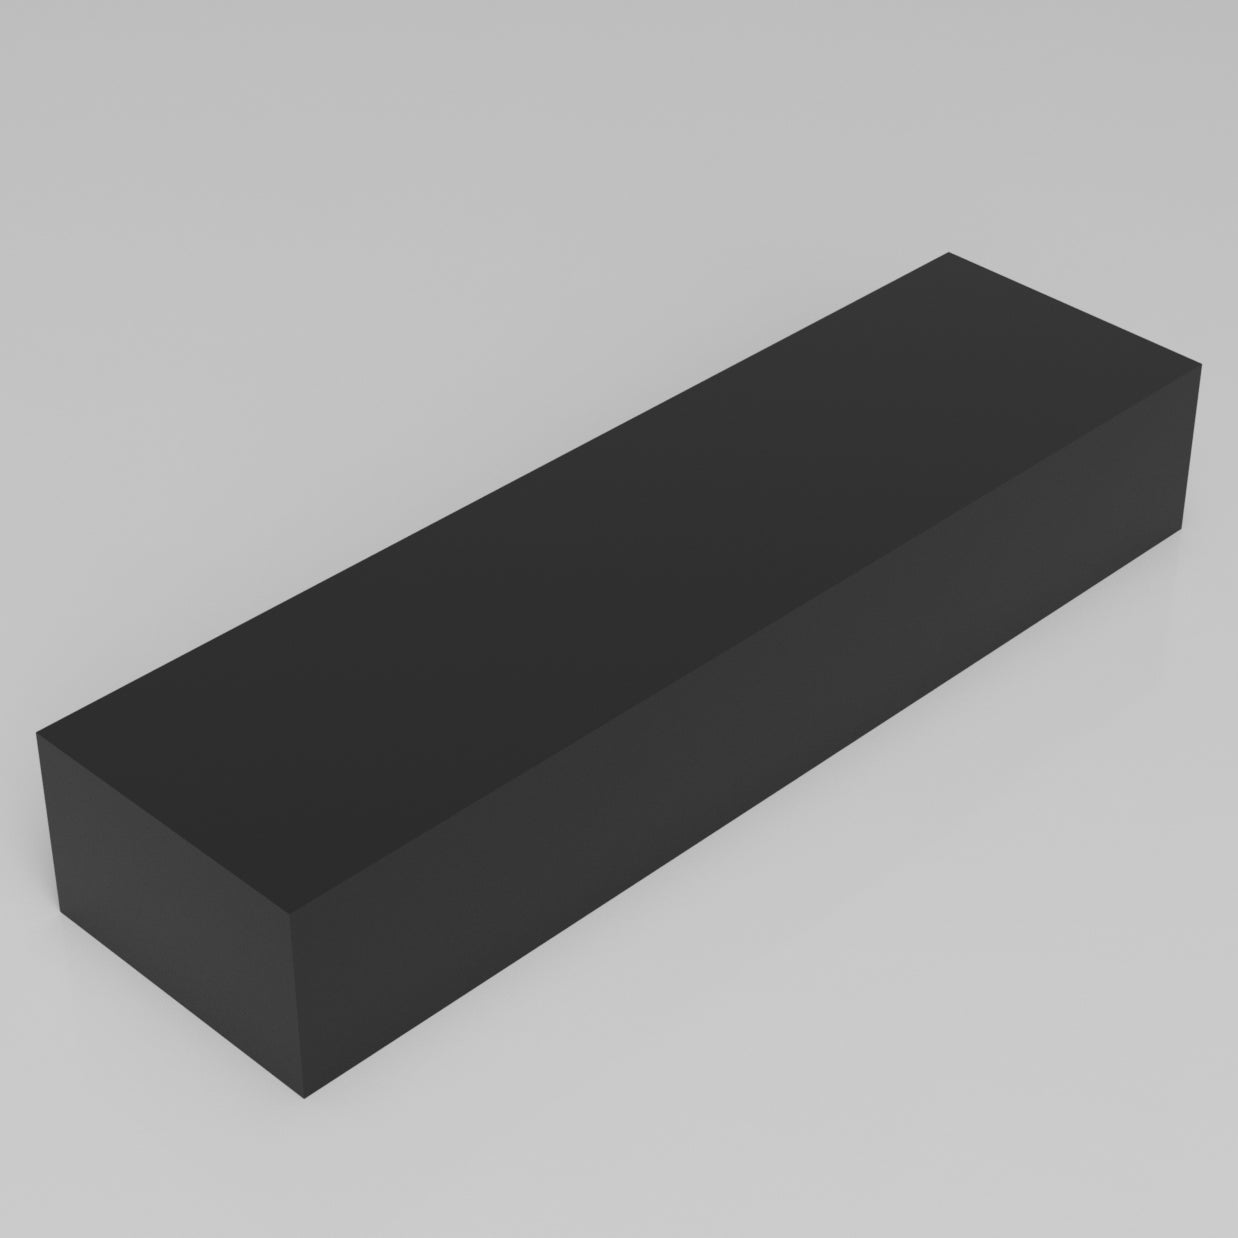 Machinable Wax Rectangular Block Front View 3 Inch by 5 Inch by 18 Inch